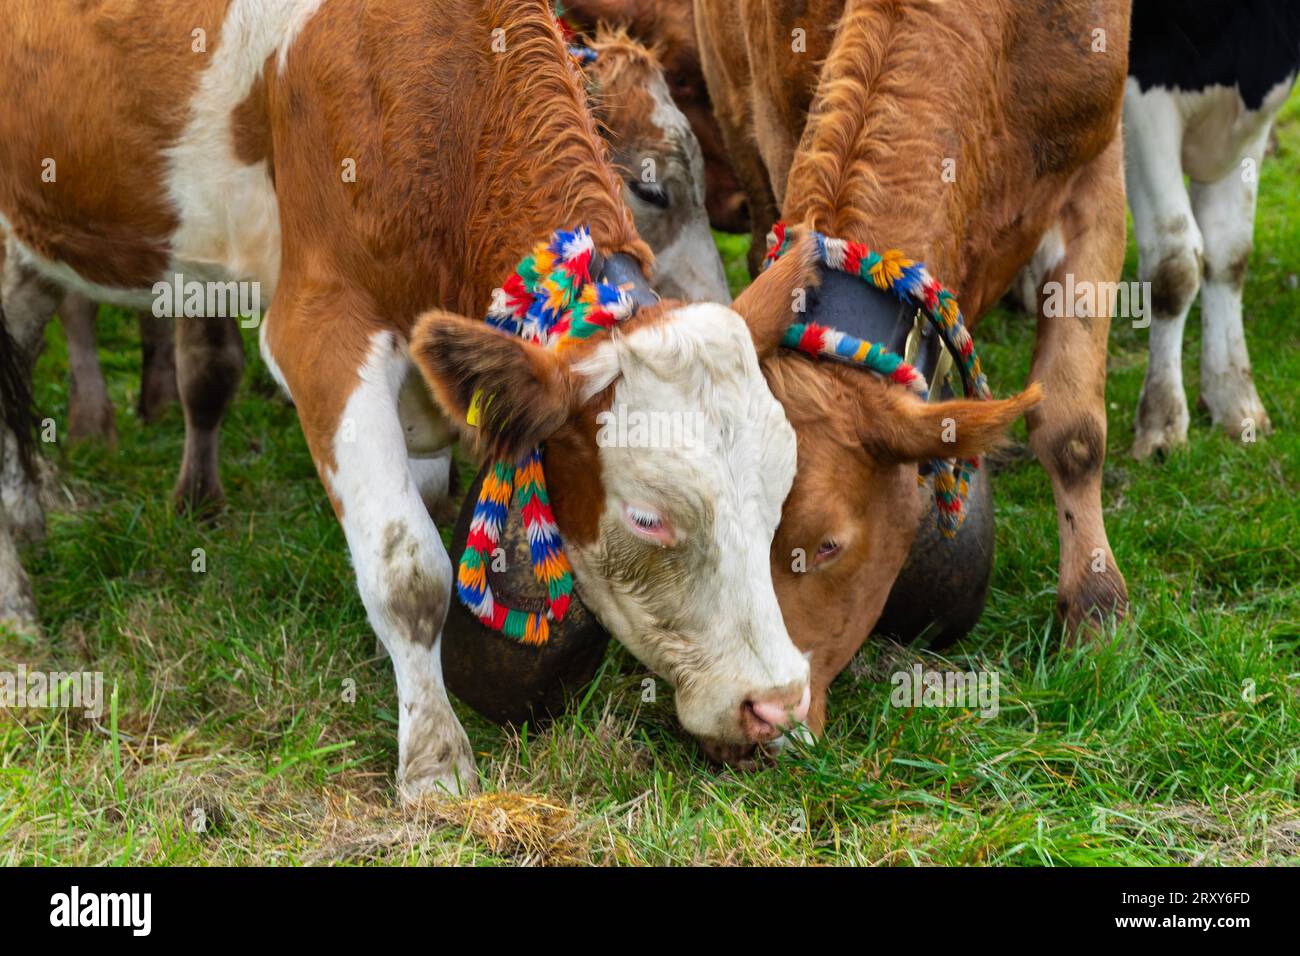 Alpine cattle with cowbells, domestic cattle (Bos taurus), pasture, cattle drive, Wertach, Allgaeu Alps, Bavaria, Germany Stock Photo